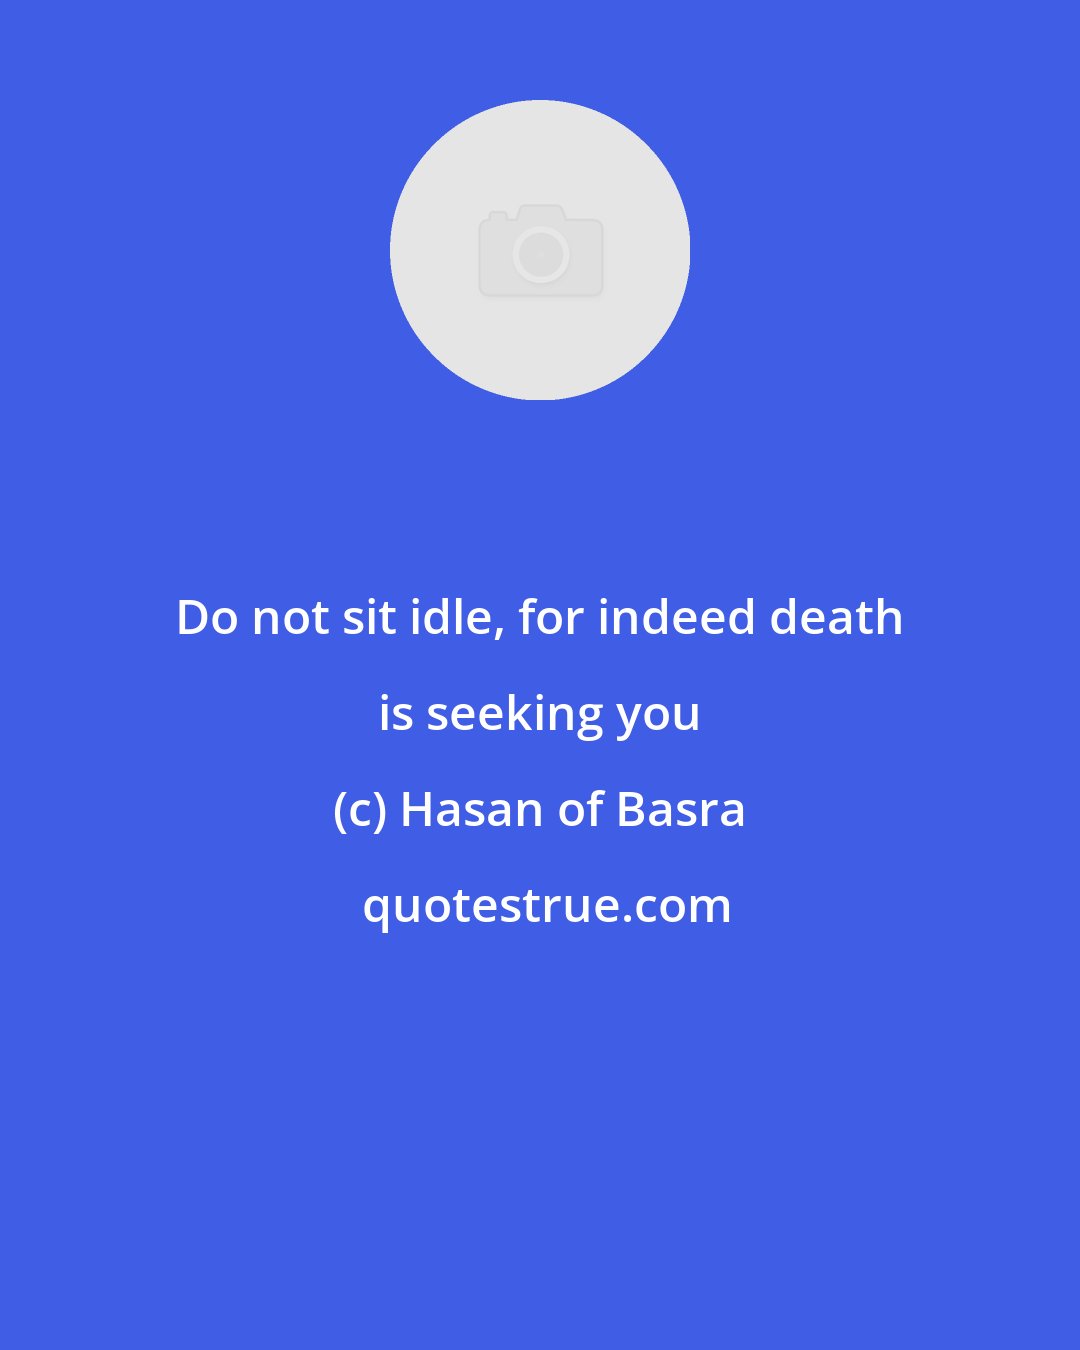 Hasan of Basra: Do not sit idle, for indeed death is seeking you